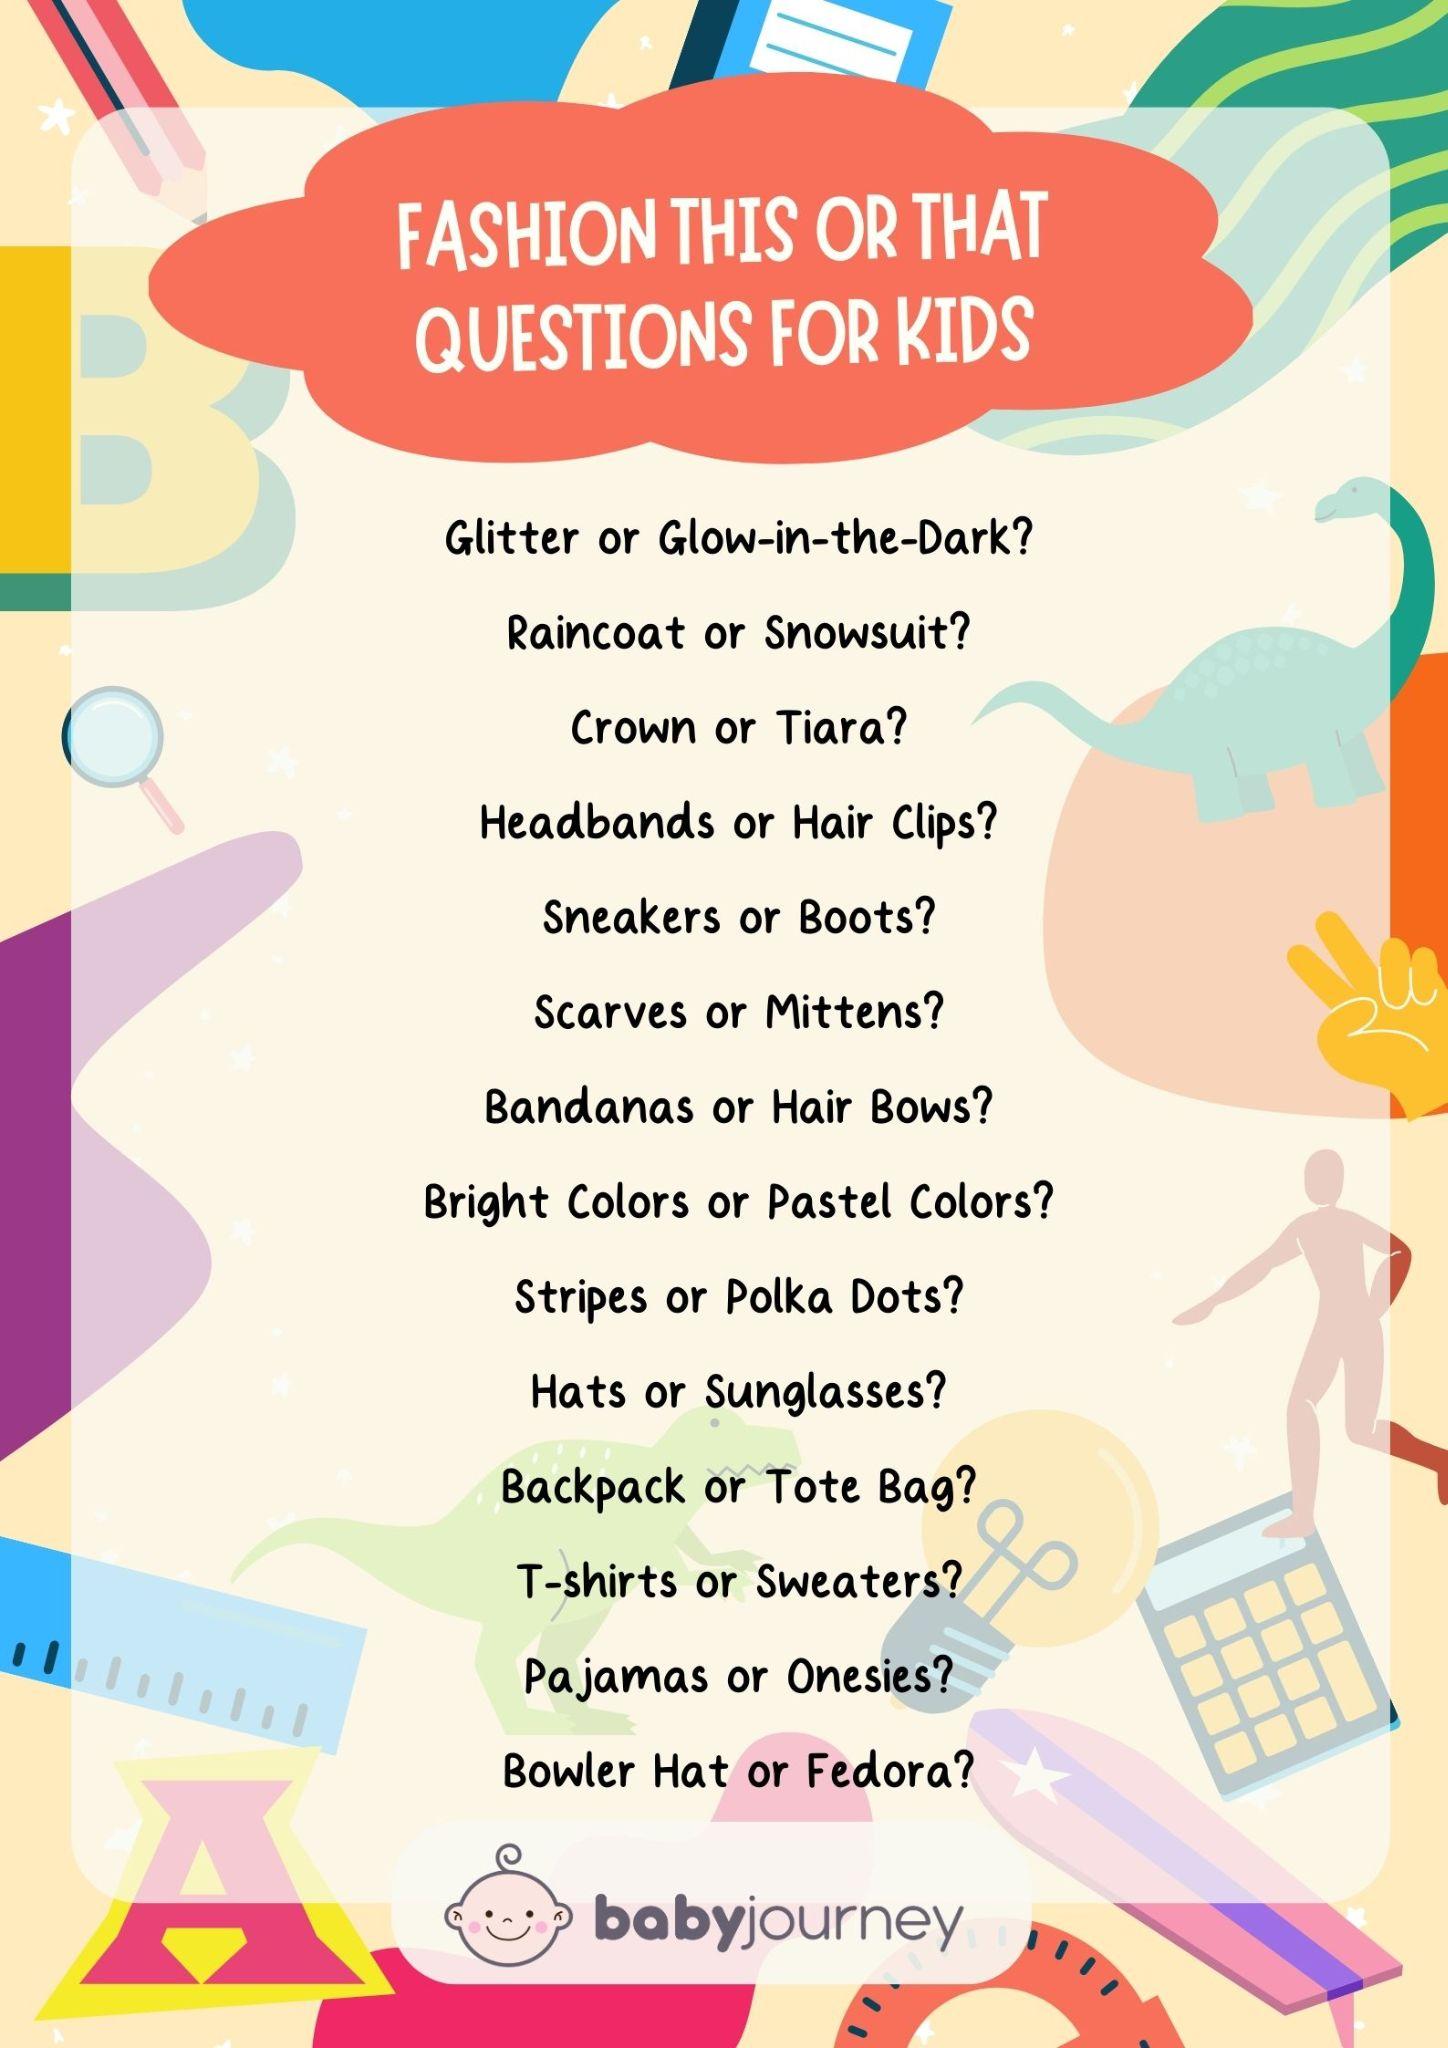 Fashion Pick One of Two Choices Game - Fun This or That Questions for Kids Ideas - Baby Journey Best Parenting Blogs